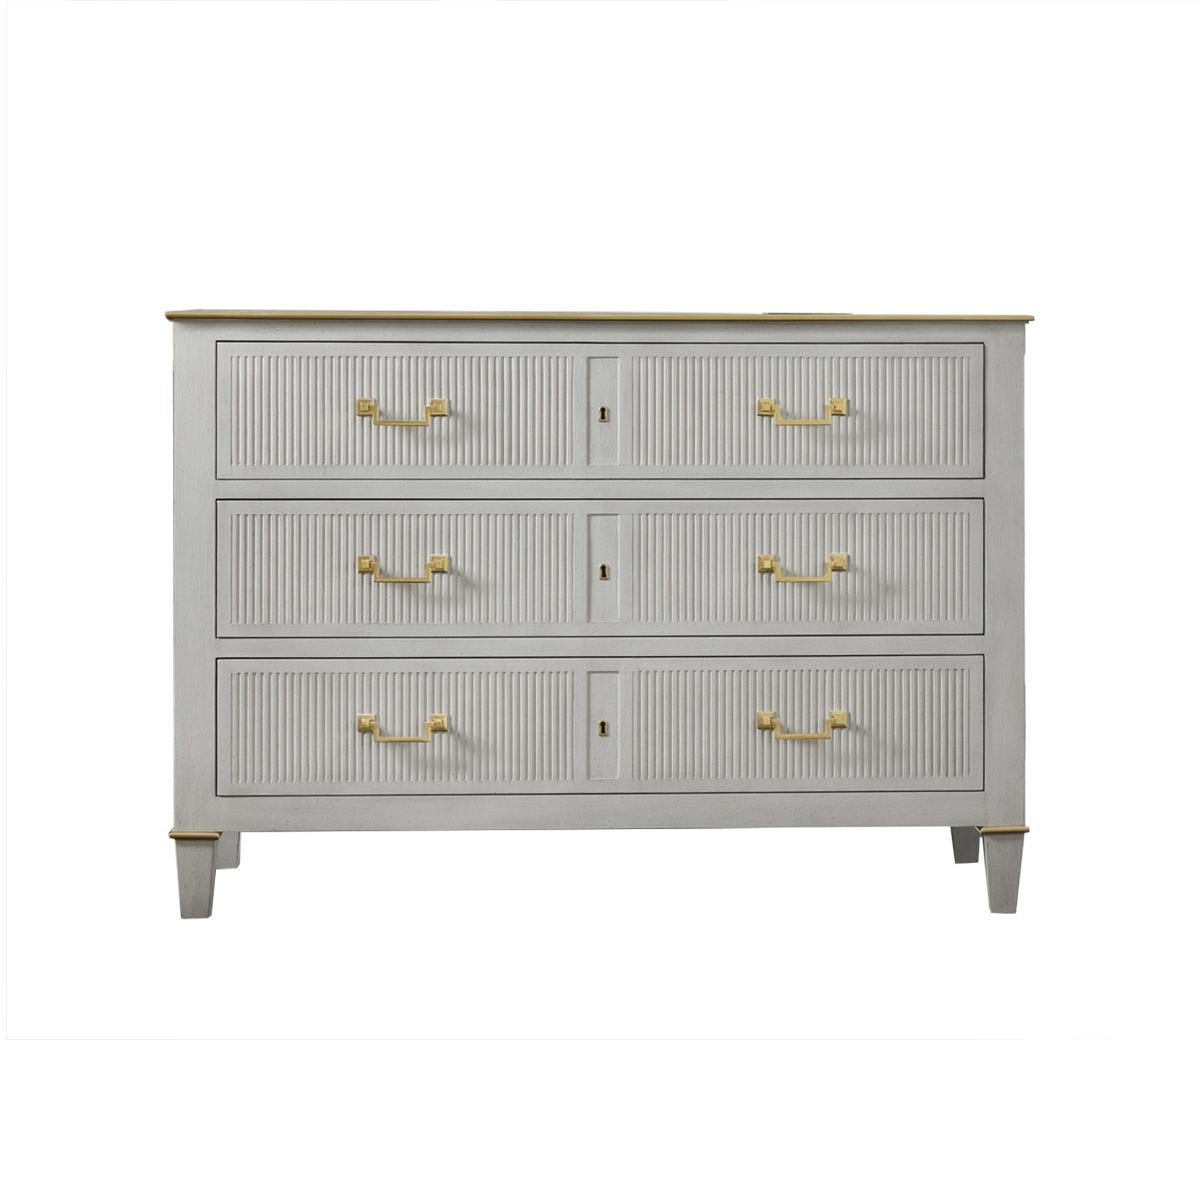 The Transitional Painted Commode is fitted with three long drawers and has an antiqued painted finish. With brass molded trim, the design features fluted drawer fronts and side panels, with solid brass Neo Classic drawer pulls and raised on short